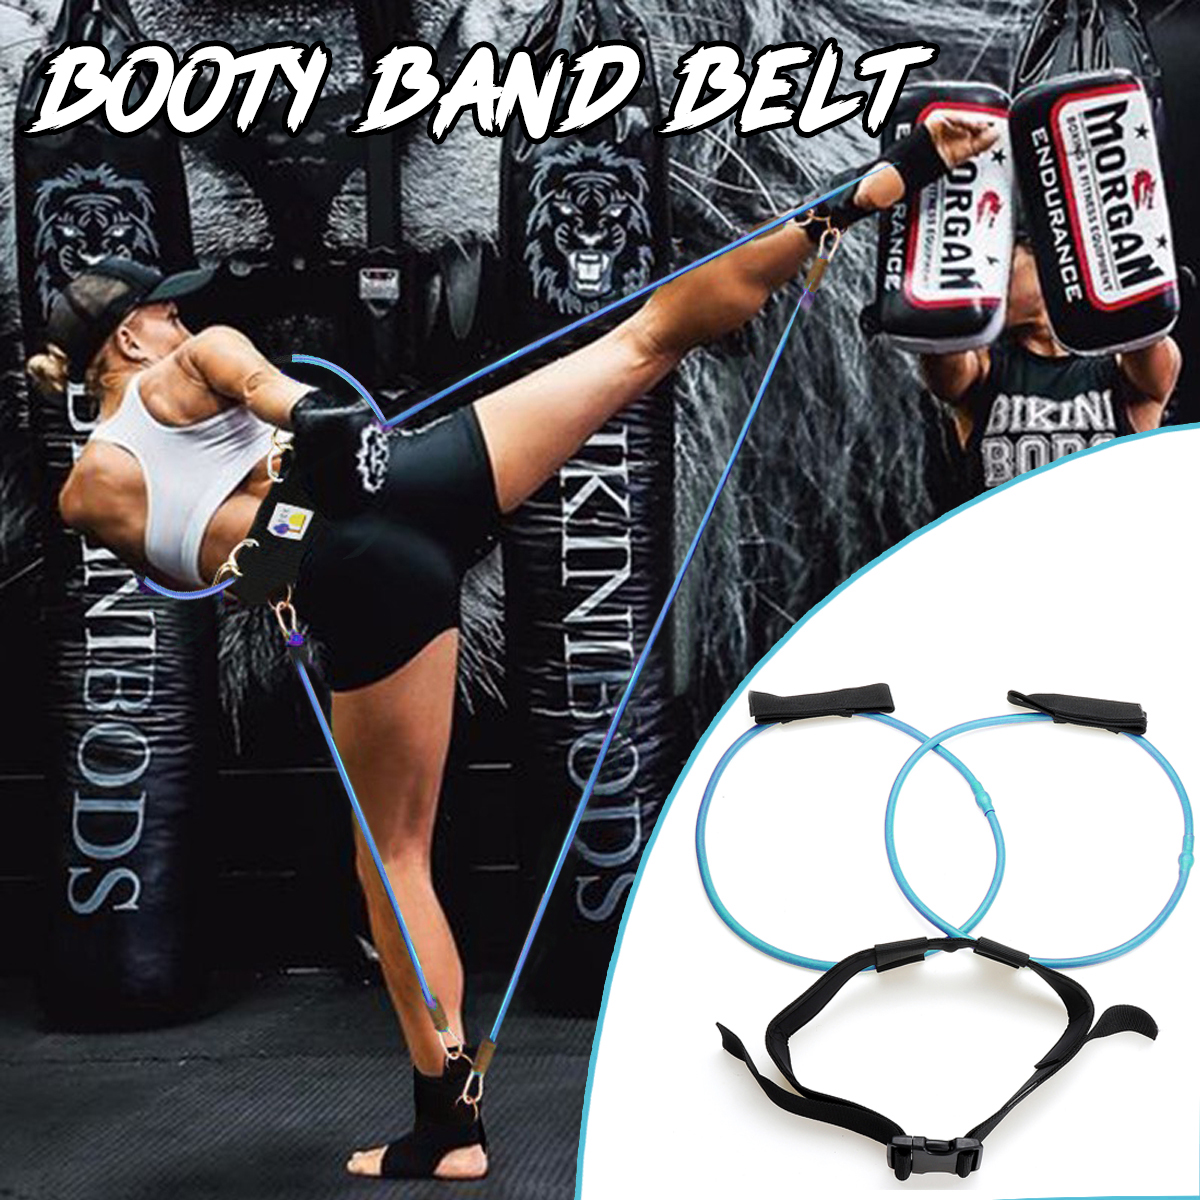 30LB-Booty-Resistance-Bands-Belt-Gym-Exercise-Training-Yoga-Butt-Lift-Fitness-Health-Workout-Band-1372253-9